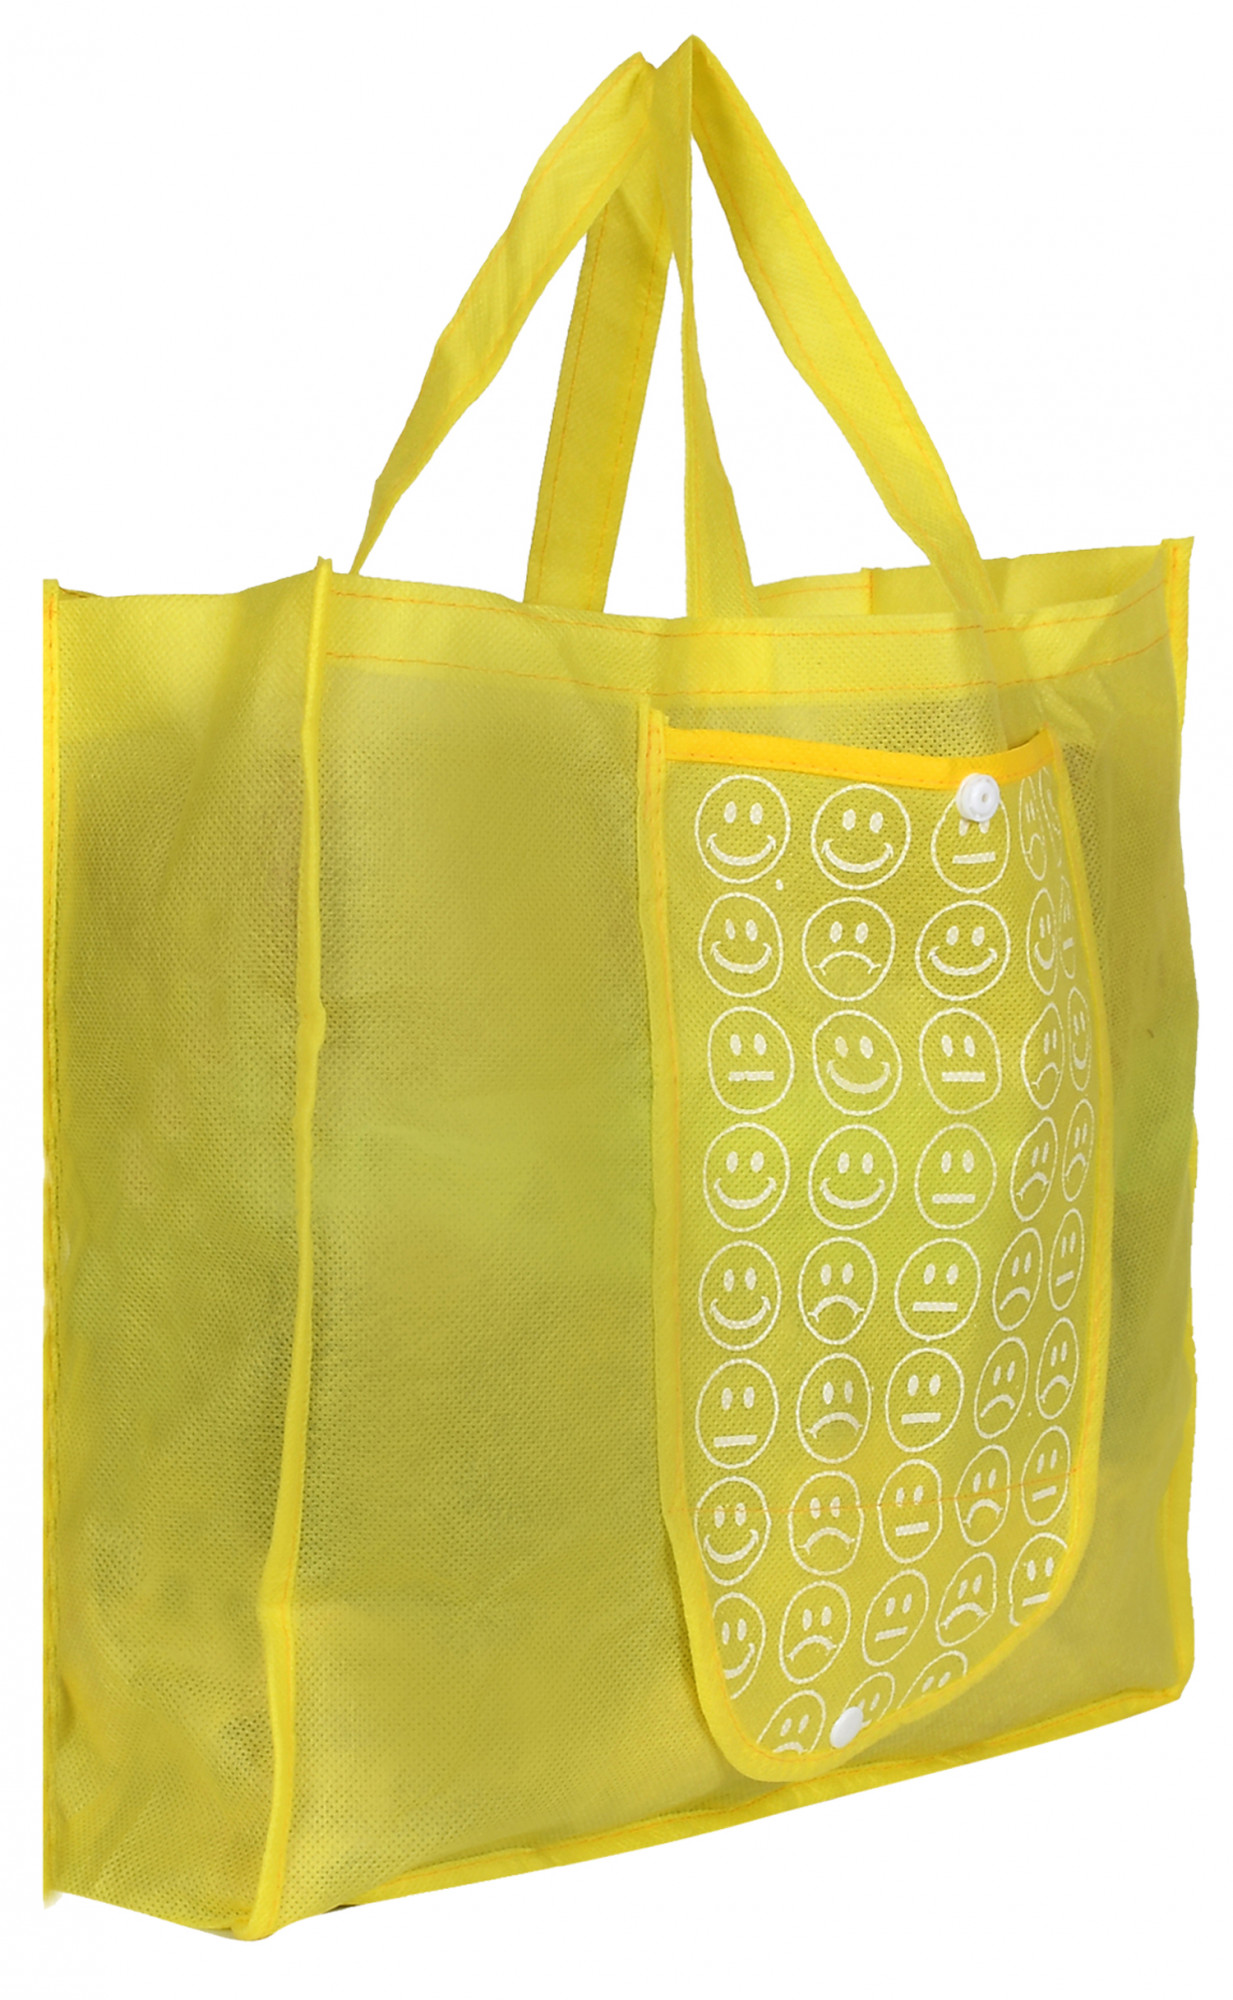 Kuber Industries Shopping Grocery Bags Foldable, Washable Grocery Tote Bag with One Small Pocket, Eco-Friendly Purse Bag Fits in Pocket Waterproof & Lightweight (Pink & Yellow)